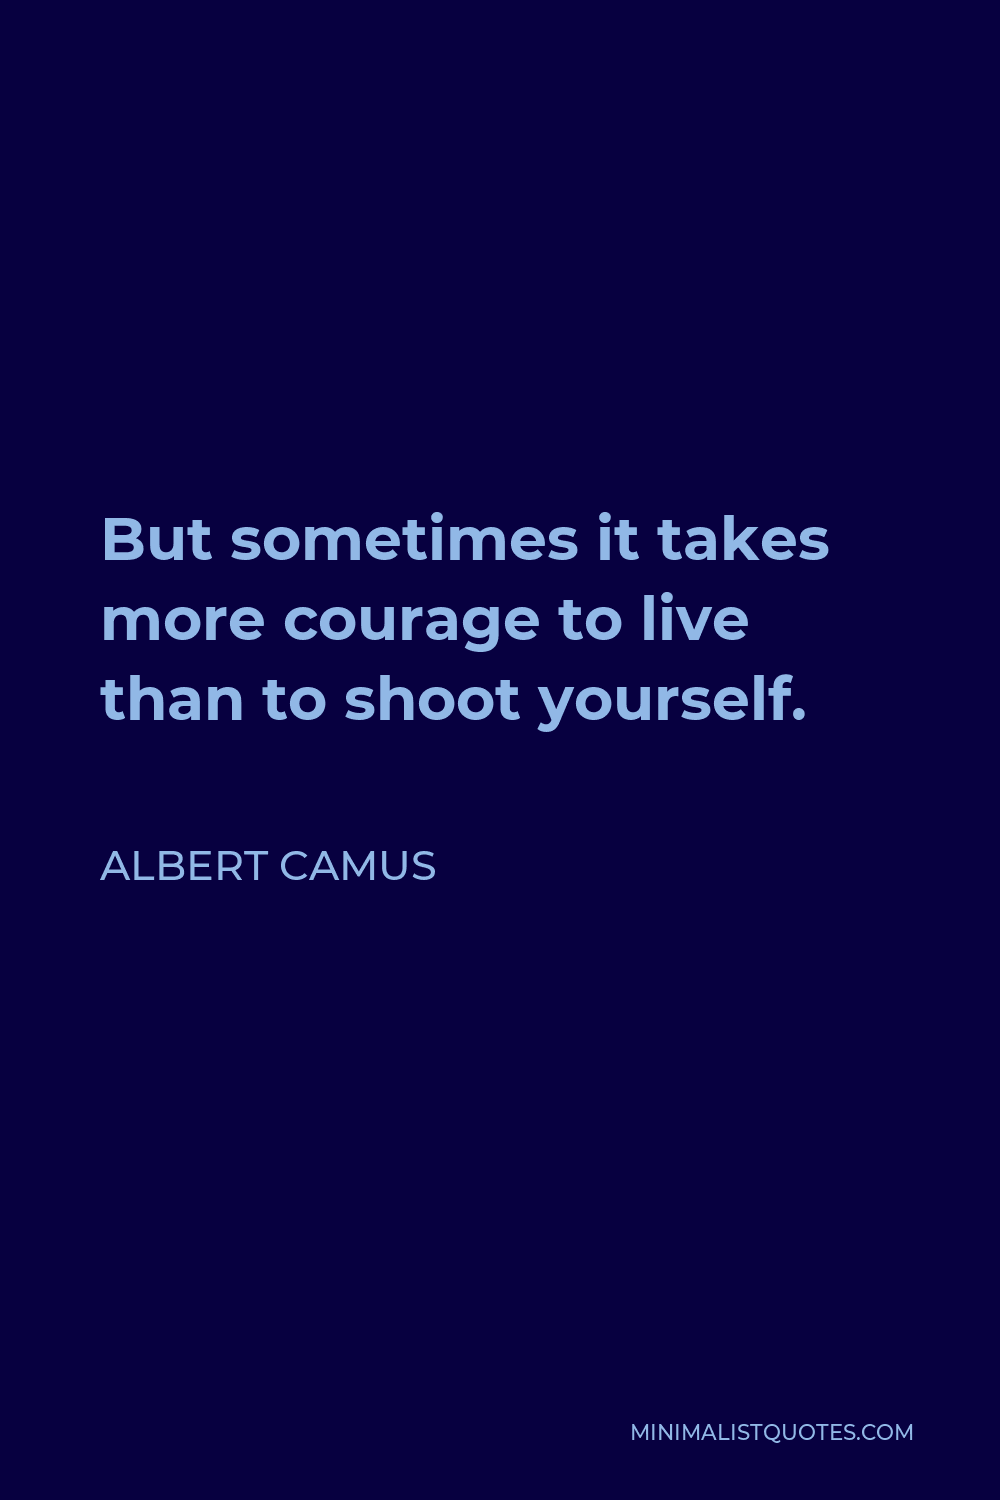 Albert Camus Quote - But sometimes it takes more courage to live than to shoot yourself.